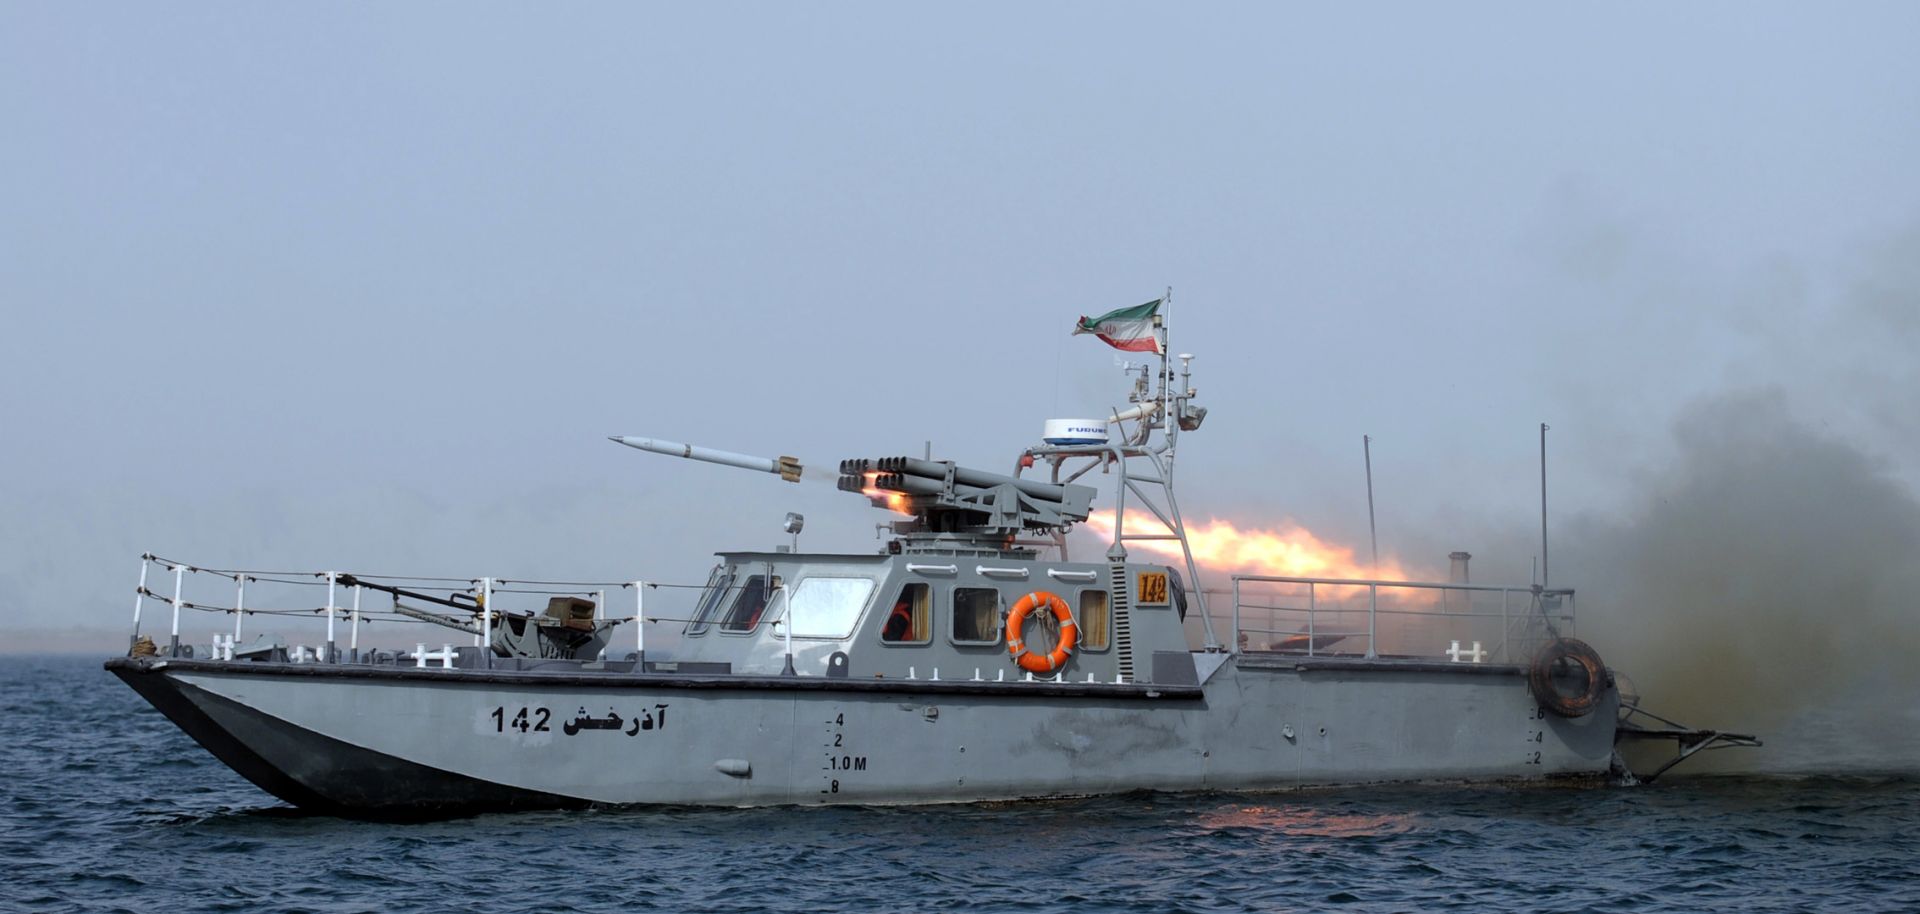 An Iranian war-boat fires a missile during the "Velayat-90" navy exercises in the Strait of Hormuz in southern Iran.